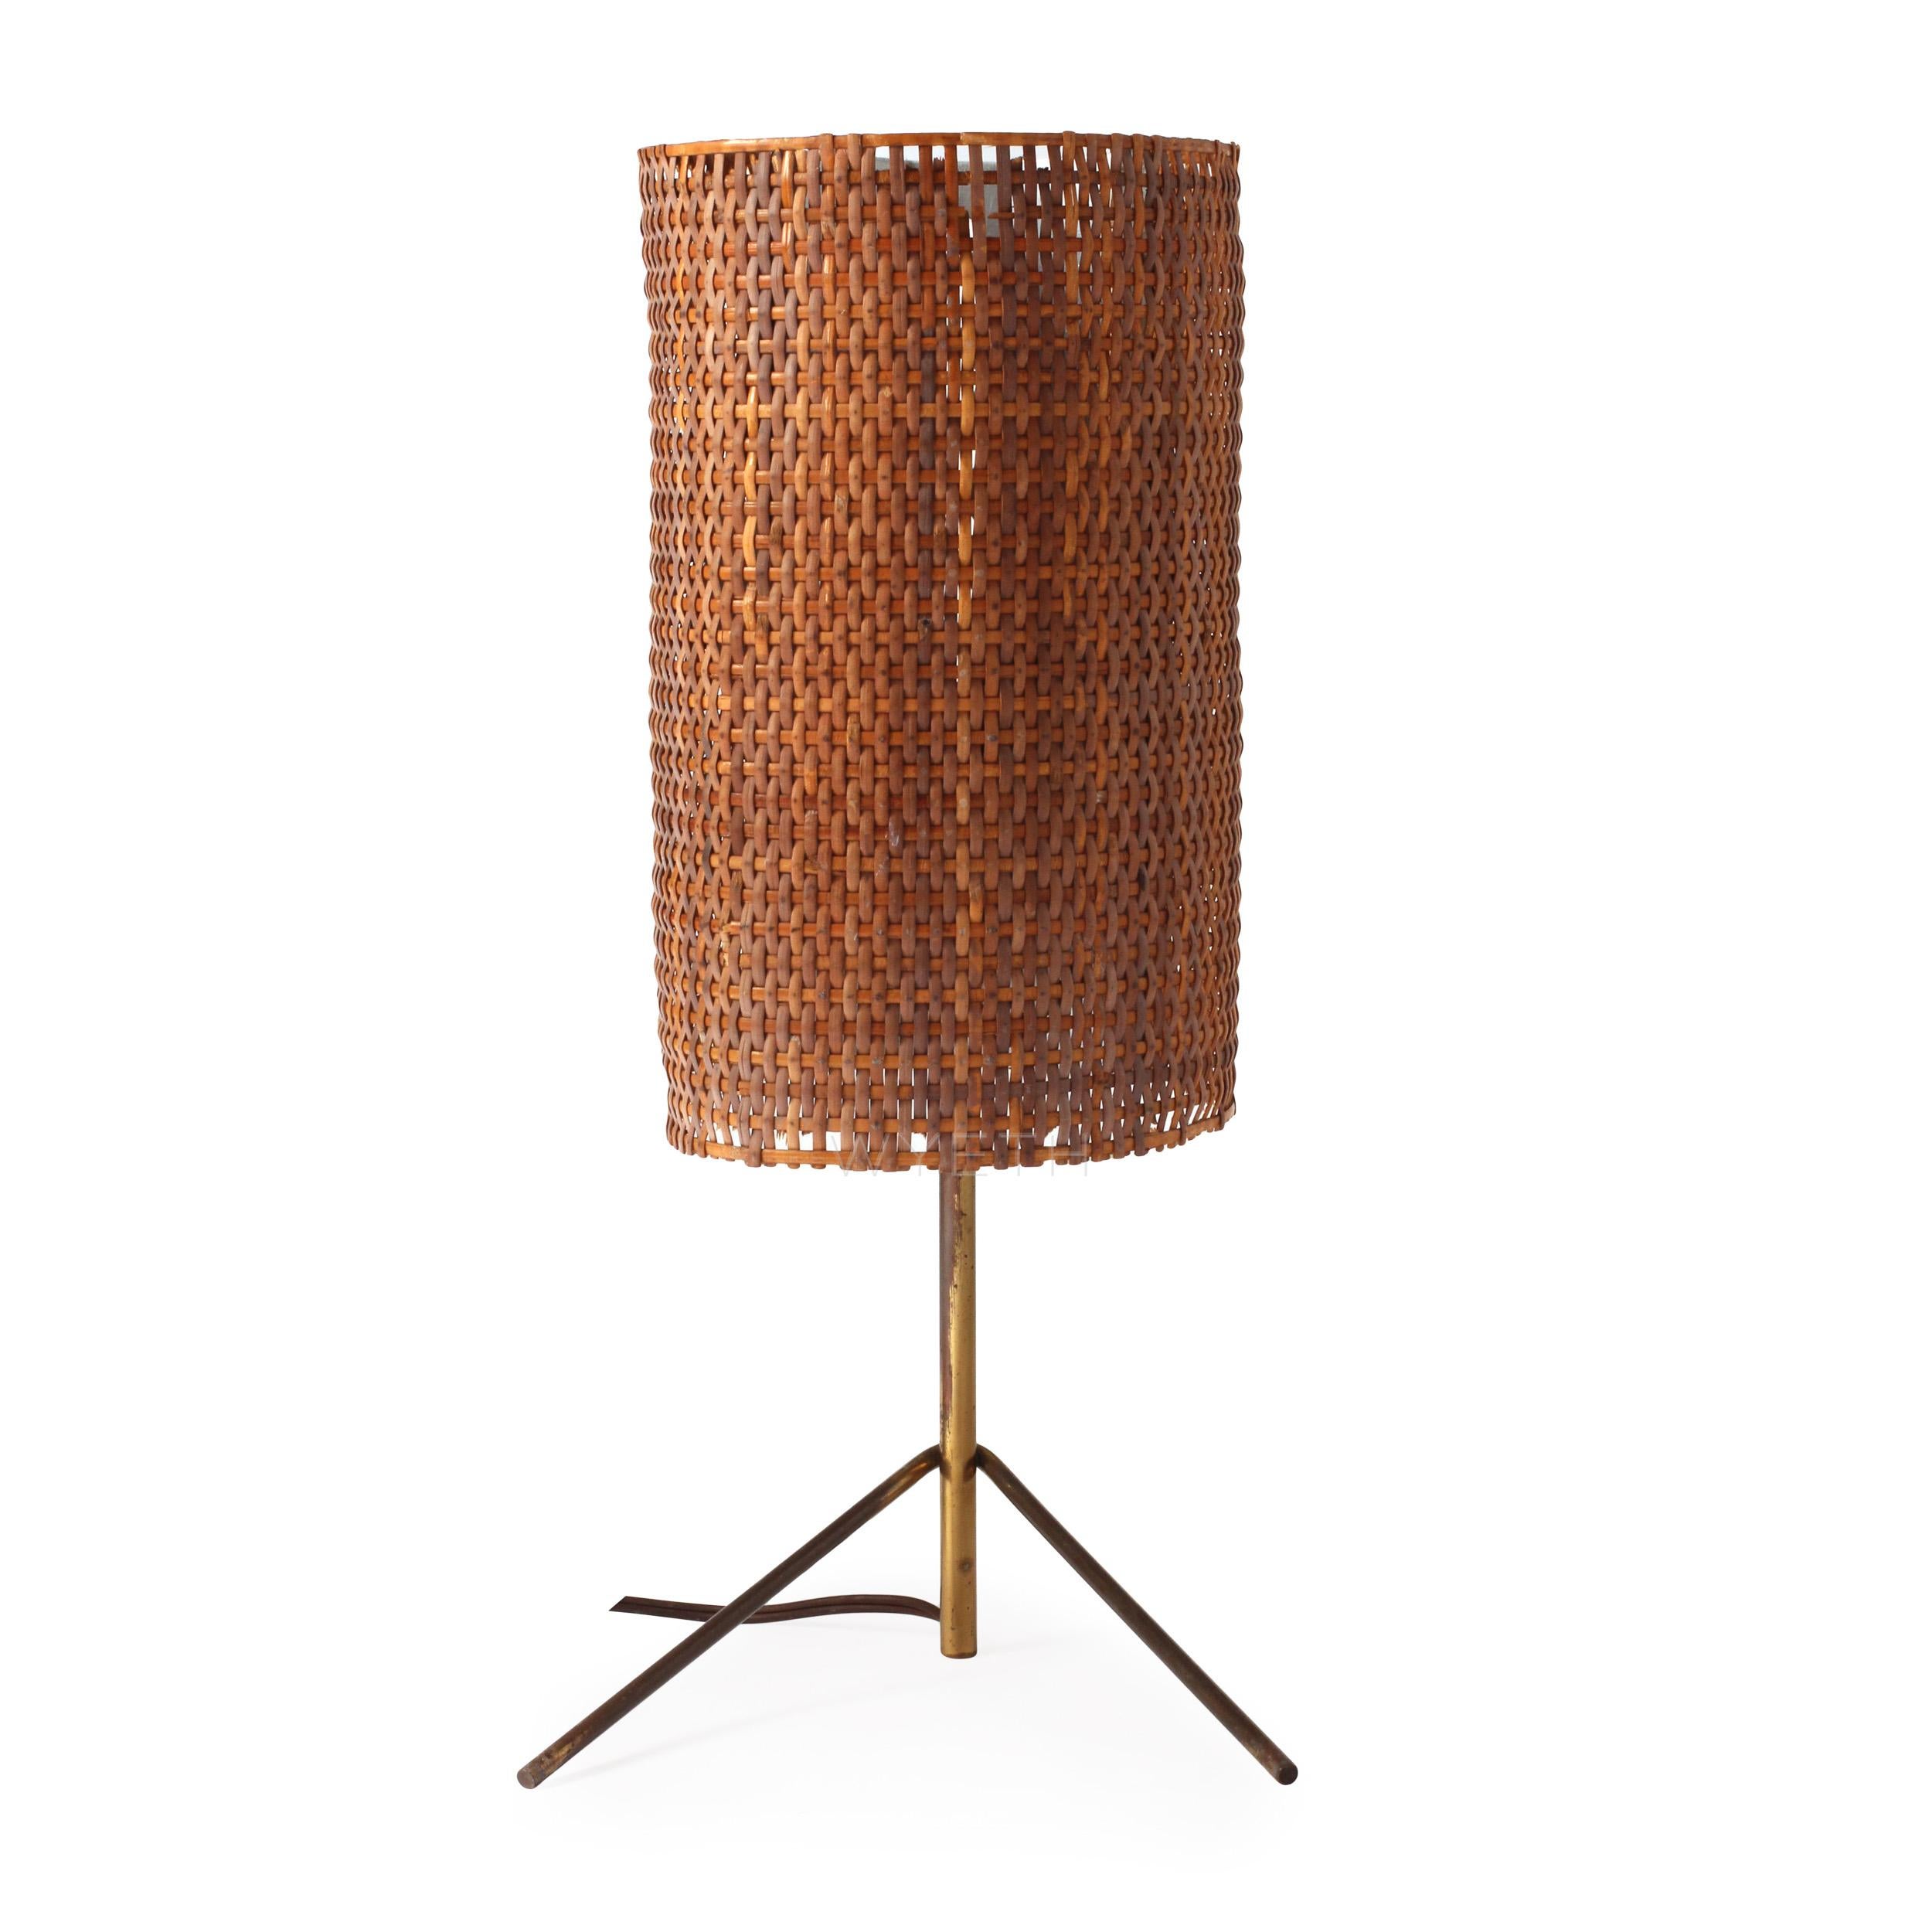 An unusual and expressive table lamp having a spare three-point brass base supporting a lacquered steel and cane shade.